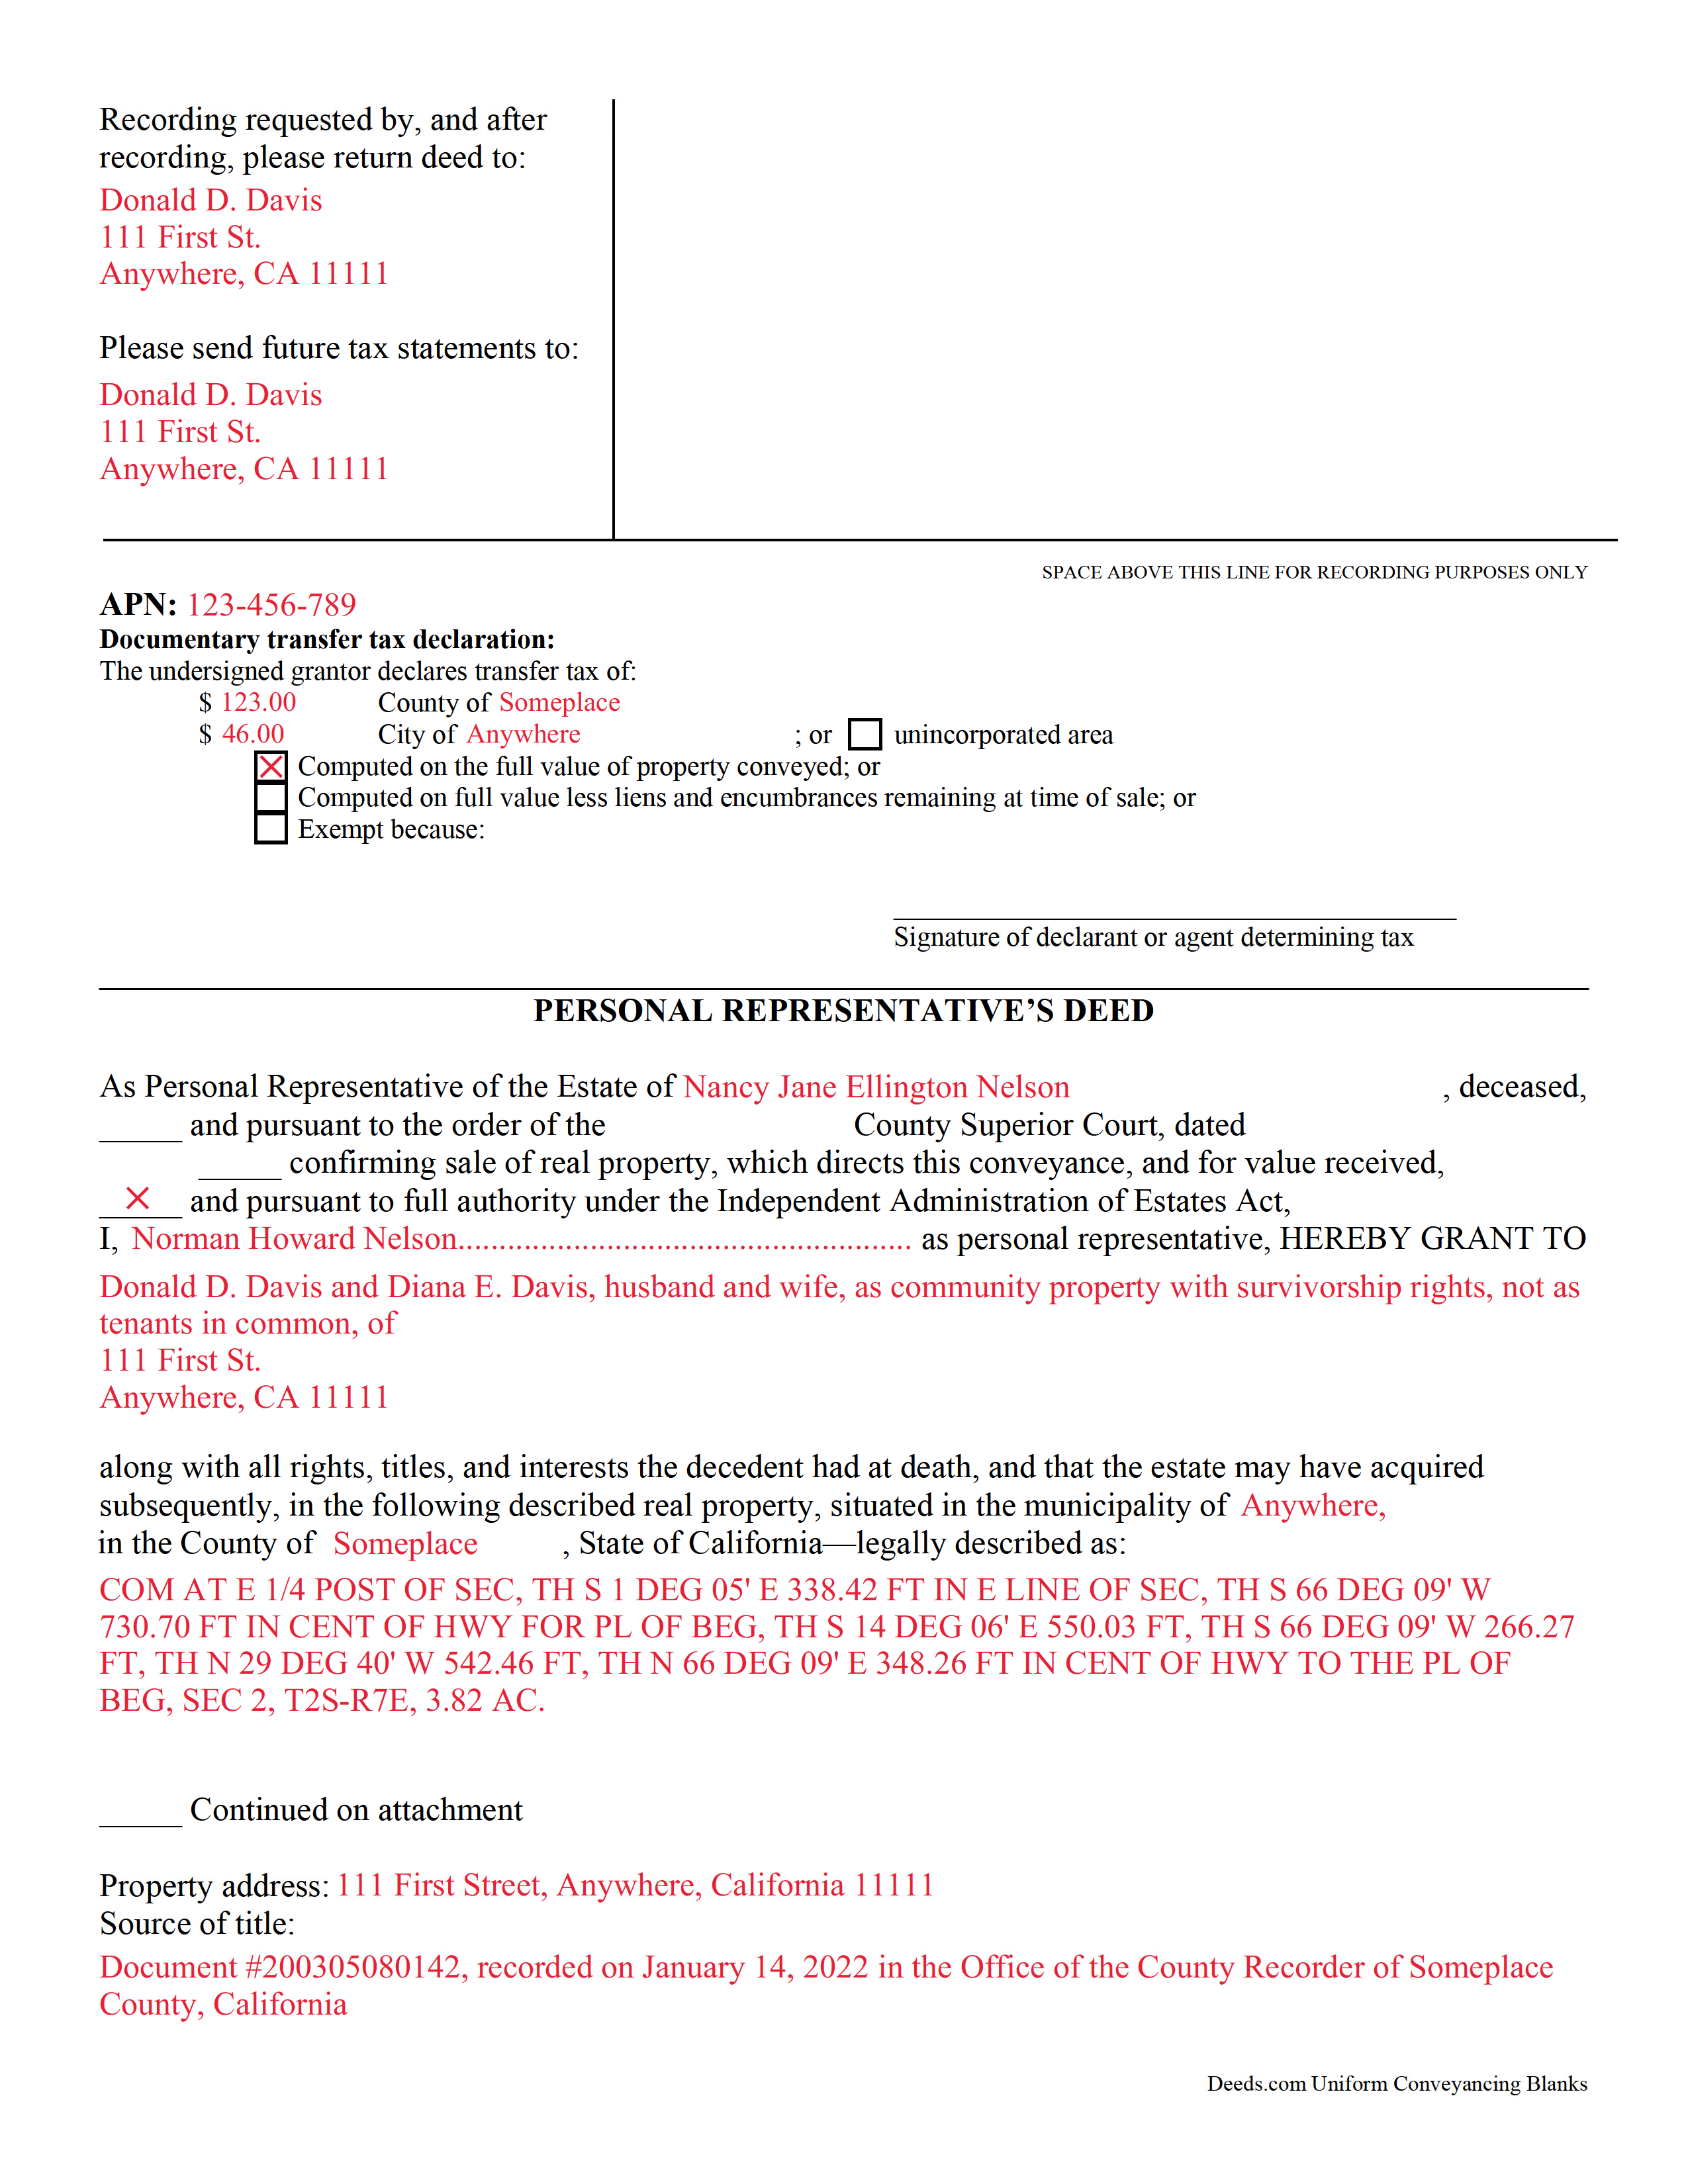 Completed Example of the Personal Representative Deed Document